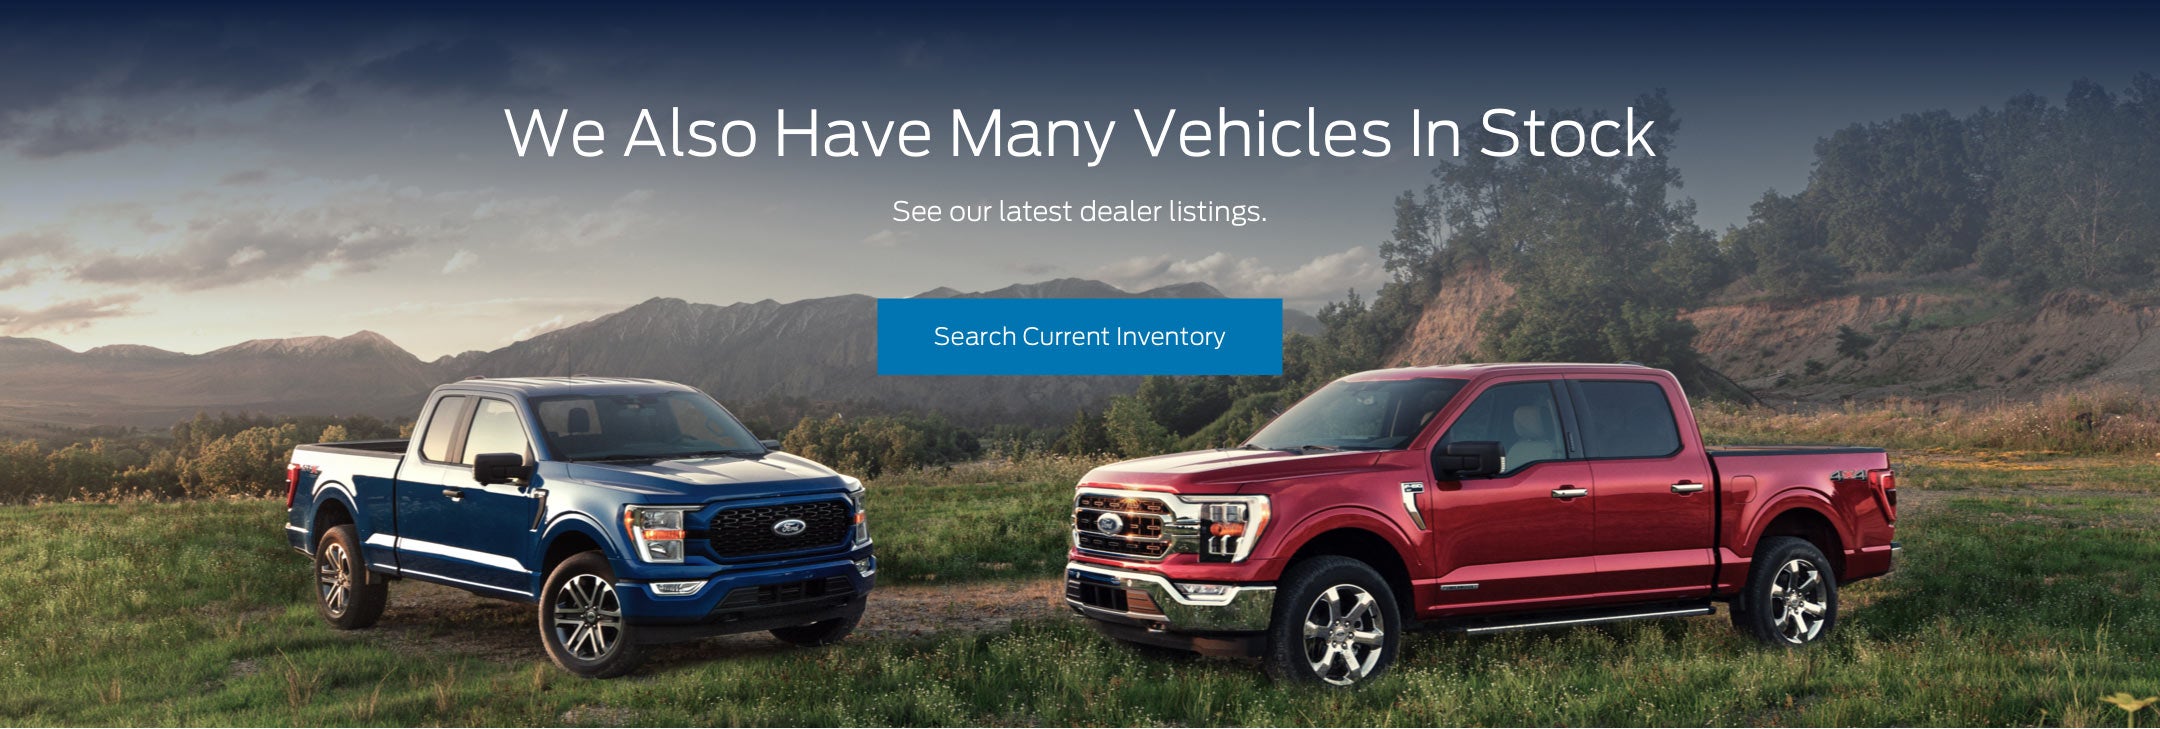 Ford vehicles in stock | Randy Wise Ford, Inc. in Ortonville MI